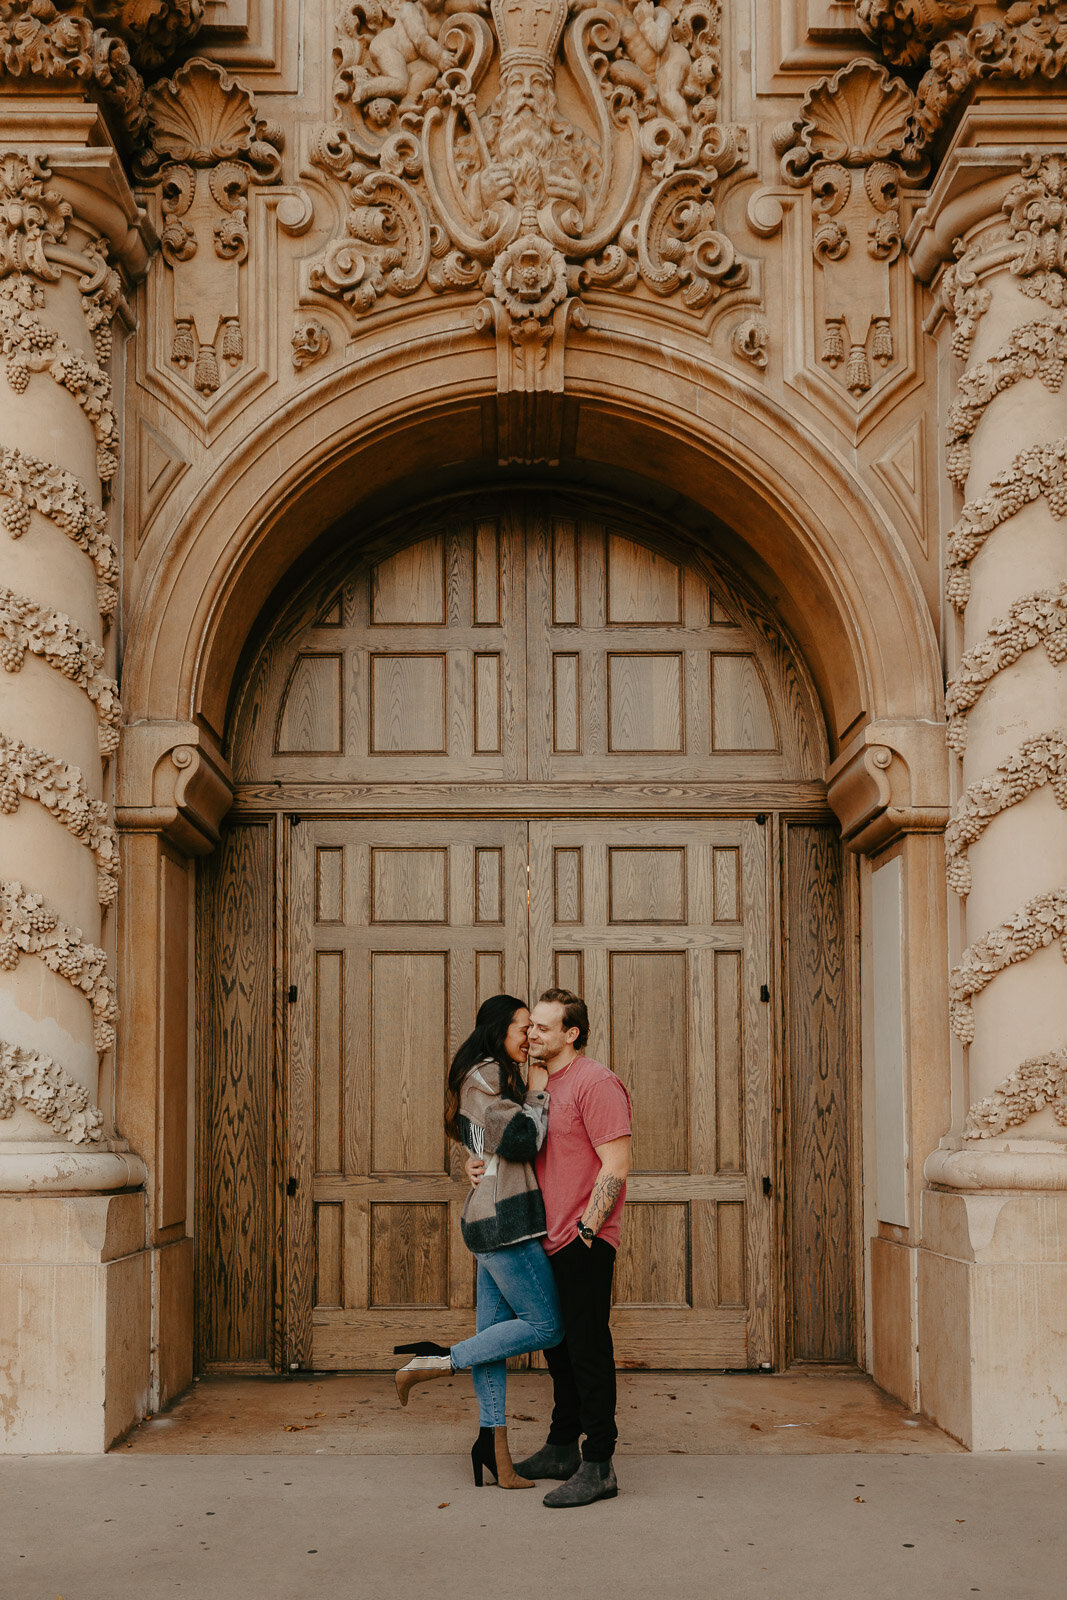 Lexx-Creative-Balboa-Park-With-Dogs-Engagement-16